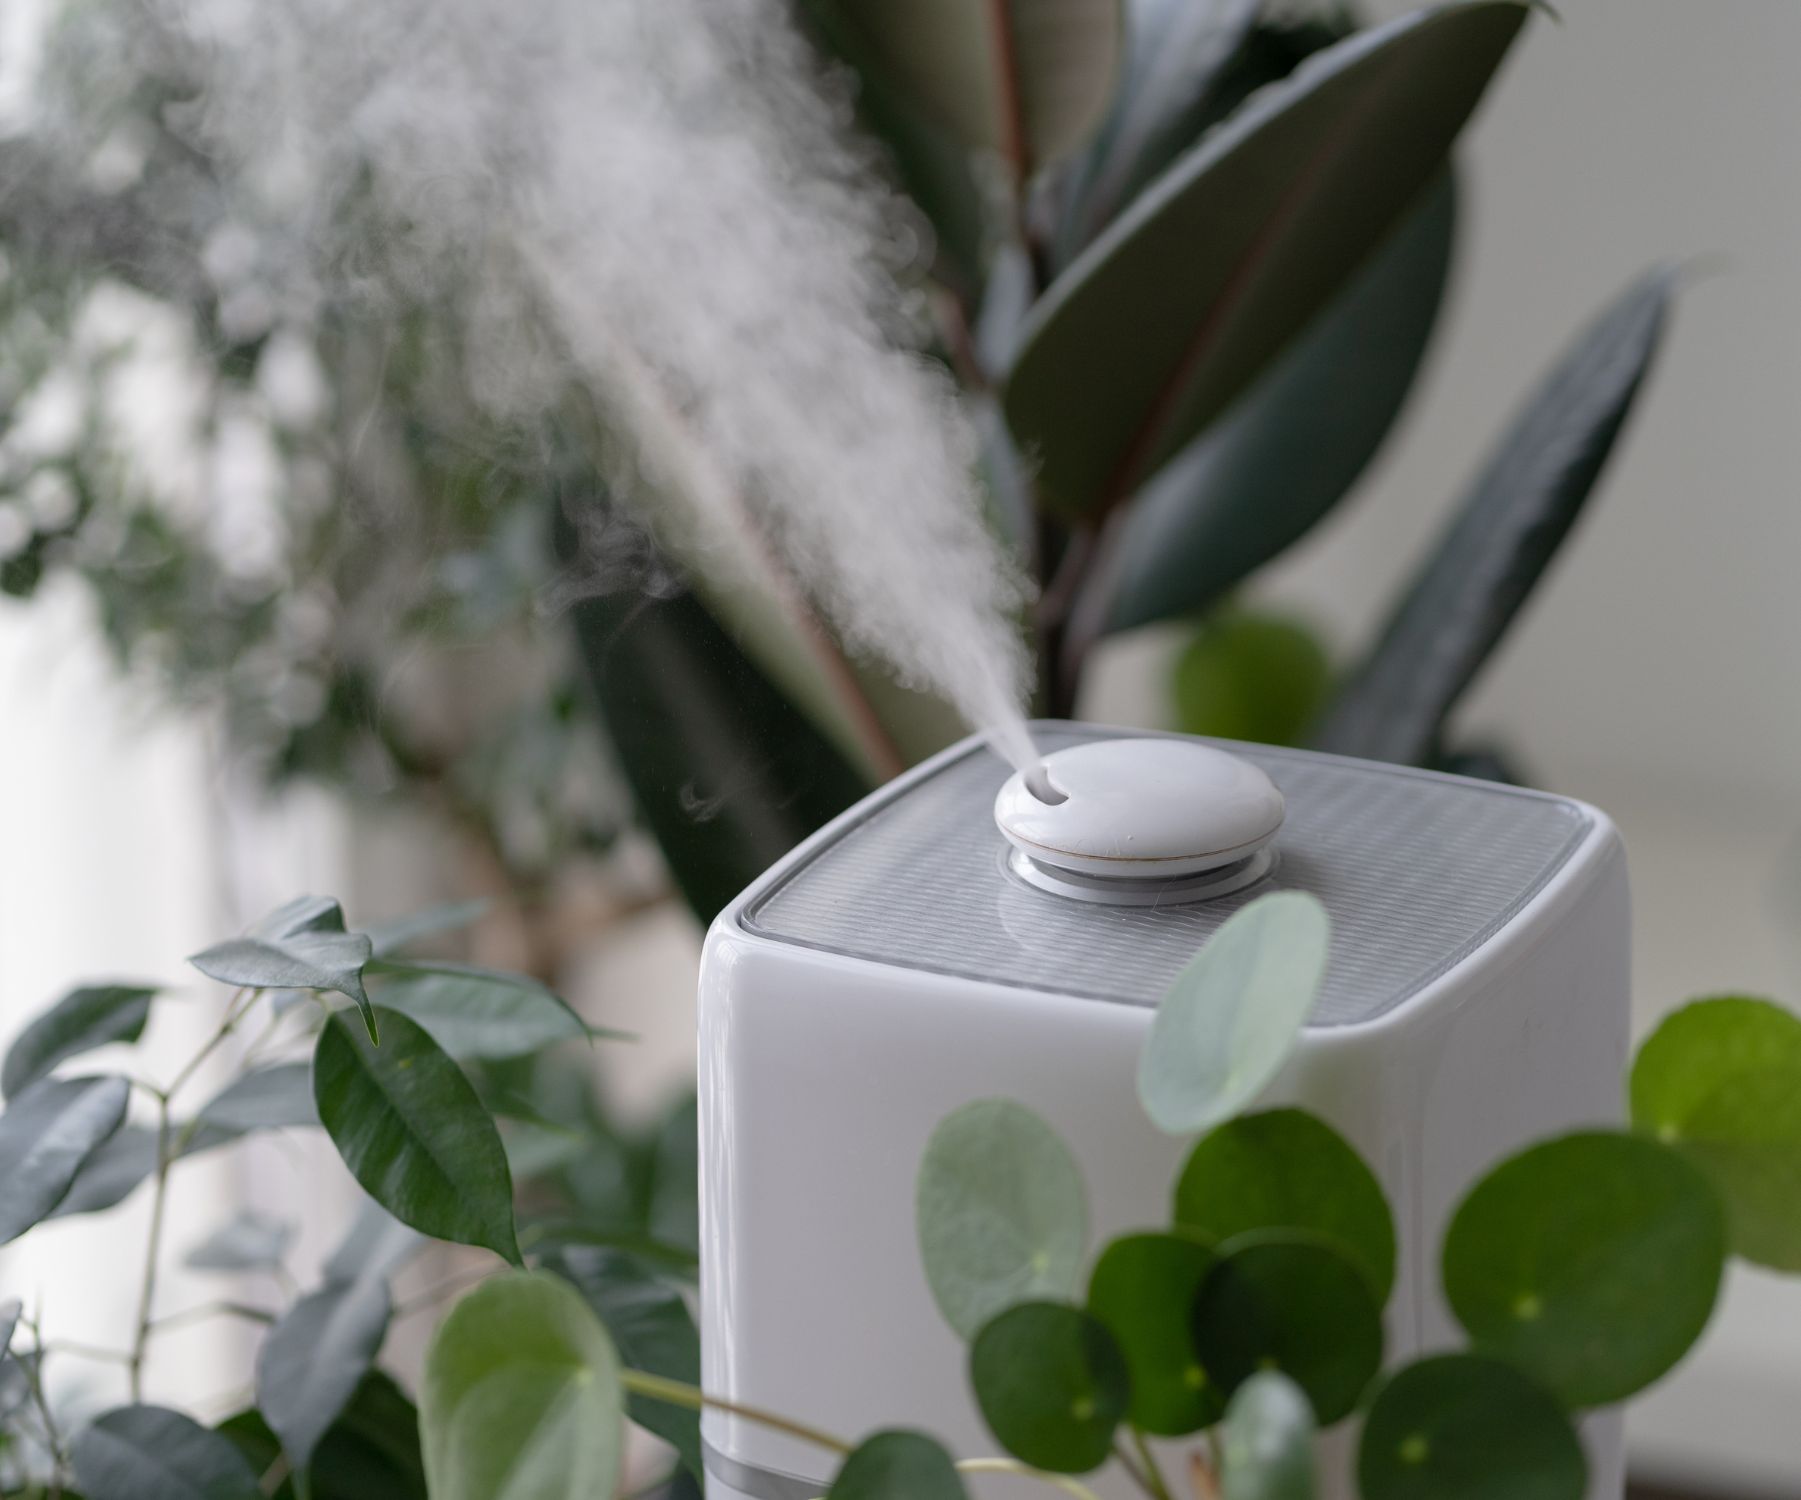 How Do I Know If My Humidifier is Working Properly